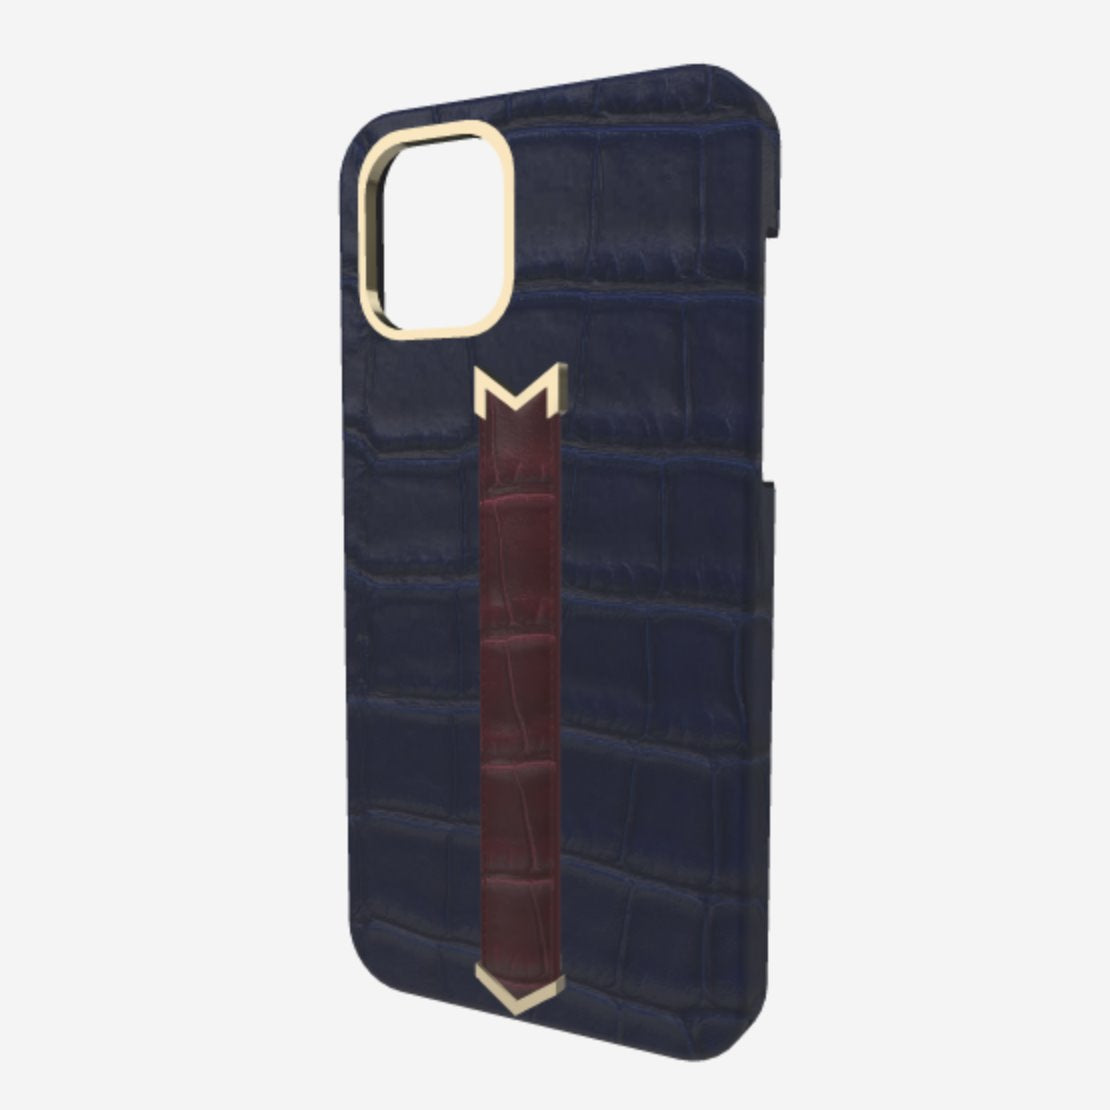 Gold Finger Strap Case for iPhone 13 Pro Max in Genuine Alligator Navy Blue Burgundy Palace 